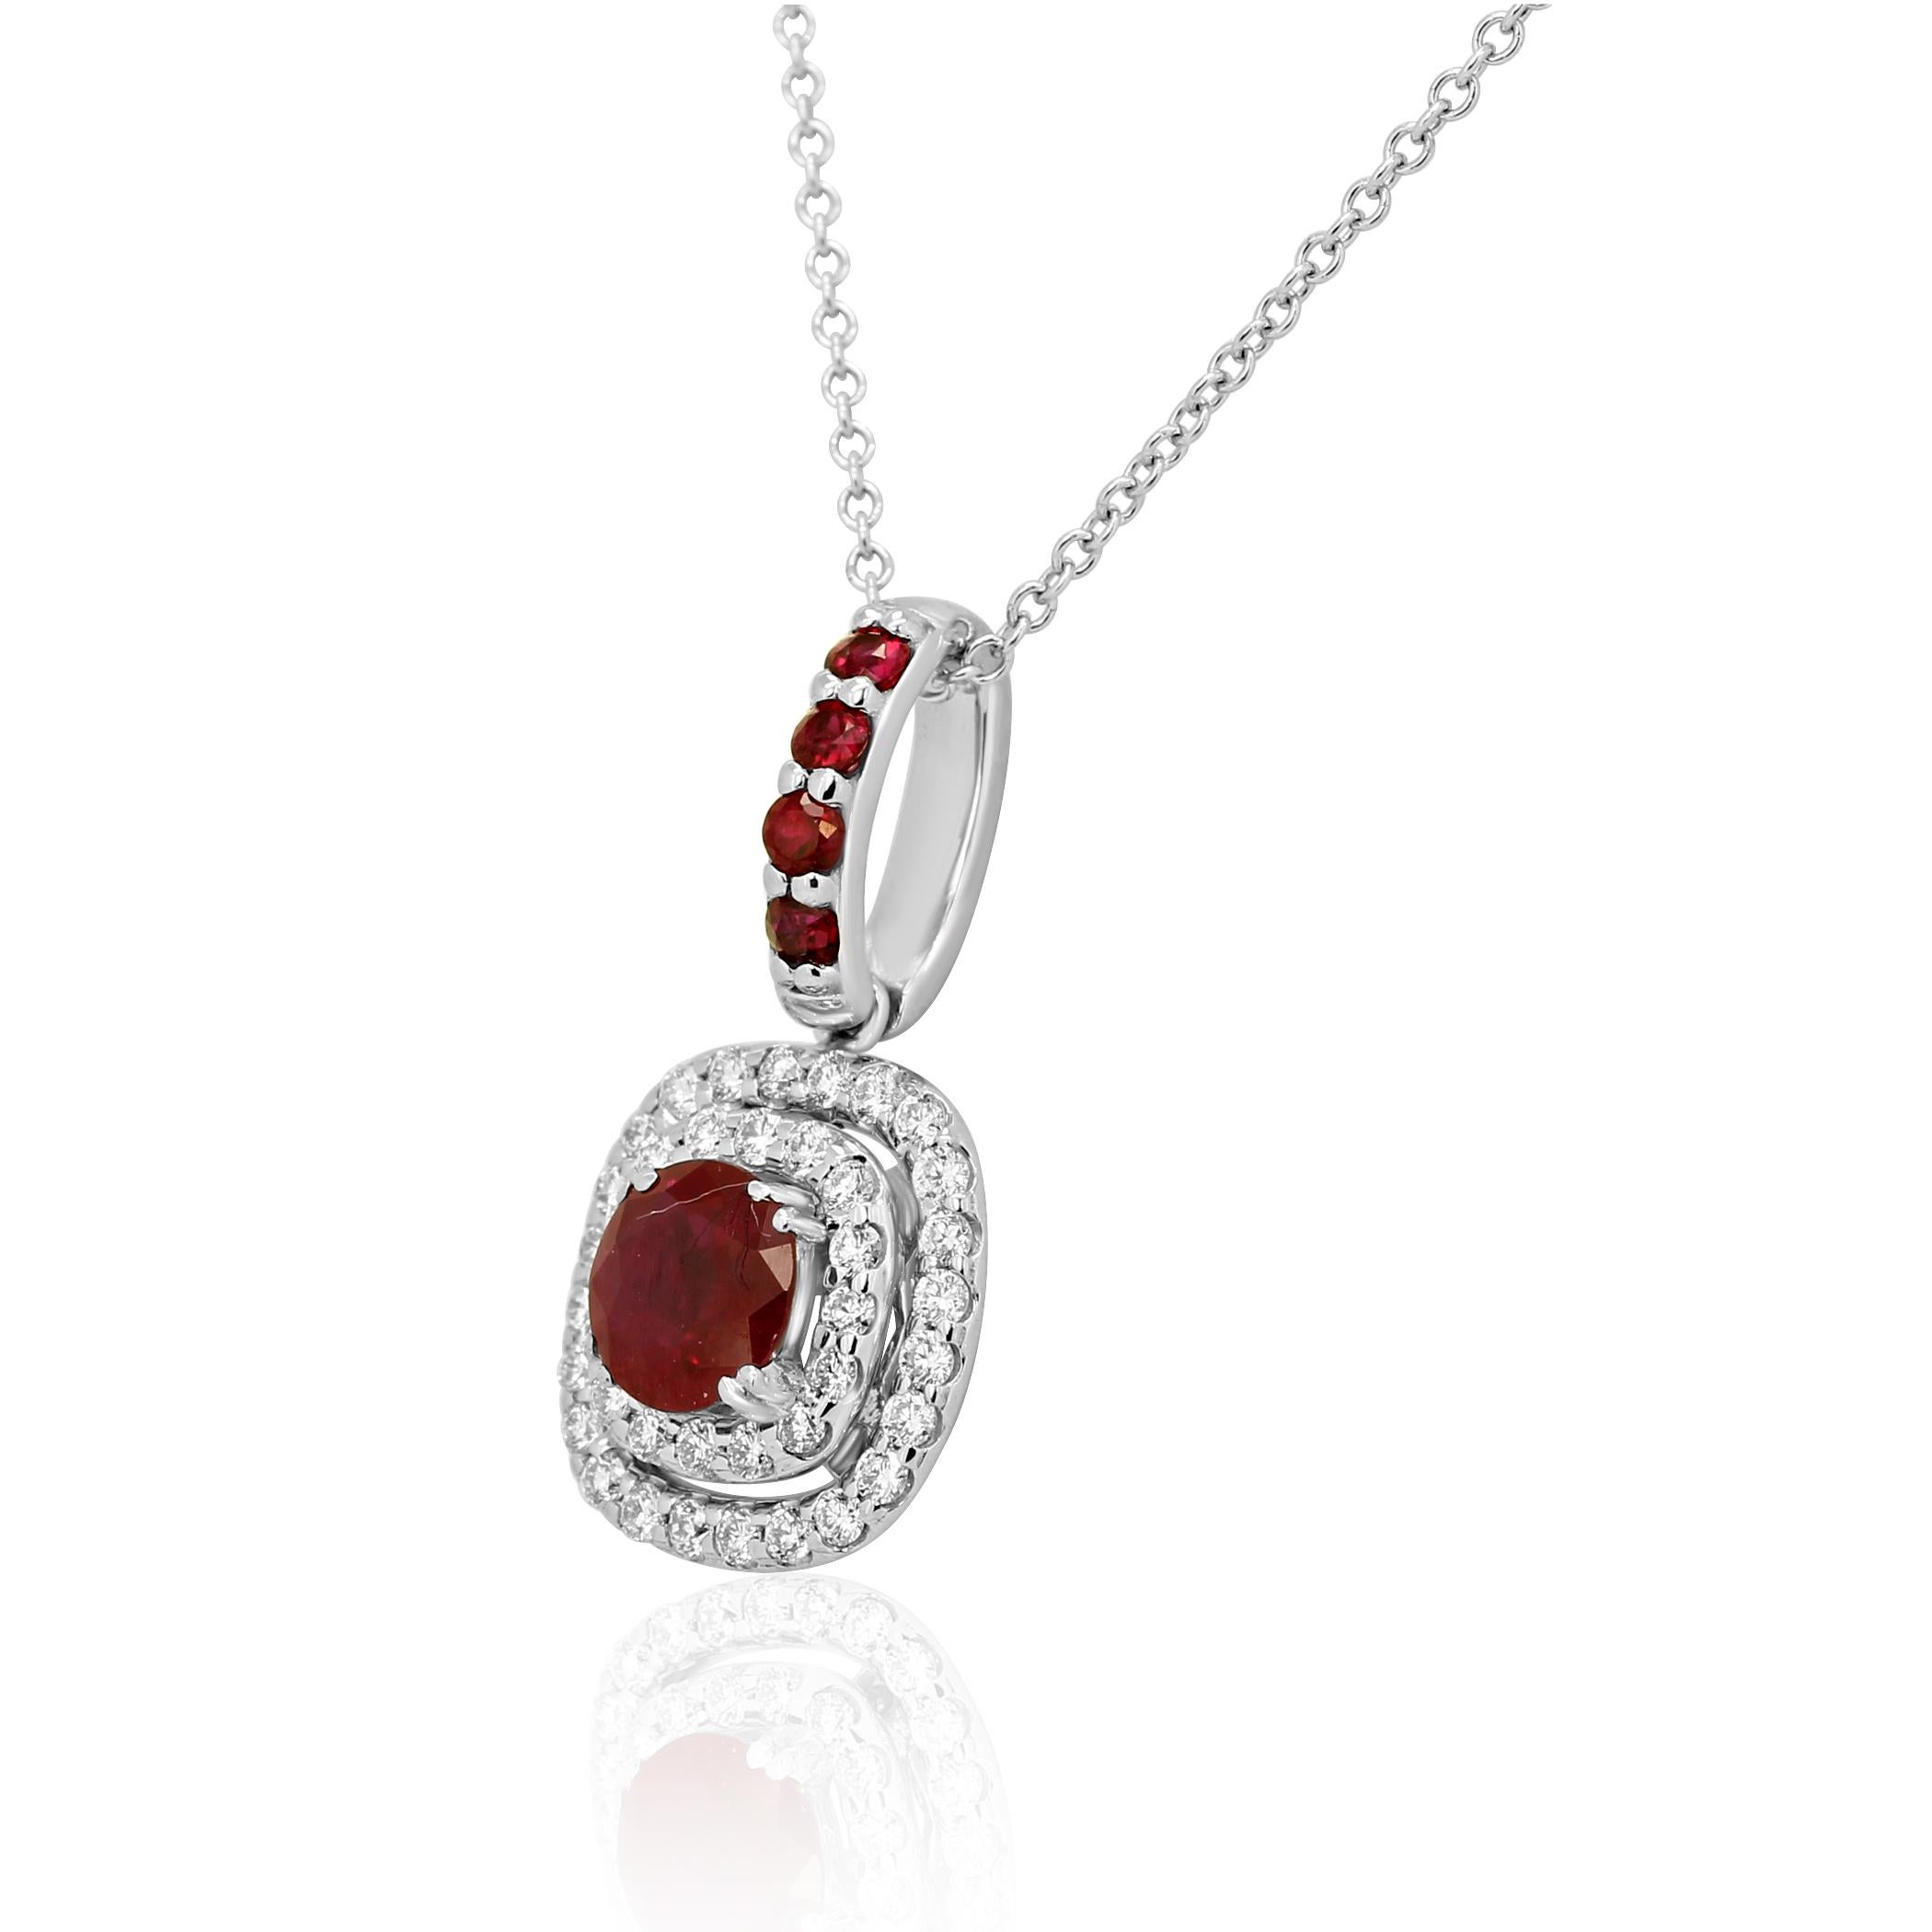 Ruby Round 0.66 Carat Encircled in Double Halo White Colorless Round Brilliant VS-SI Clarity Diamonds 0.30 Carat set with  4 Ruby Rounds 0.15 Carat on the bell of 14K White Gold Pendant drop Chain Necklace.

Style available in different price